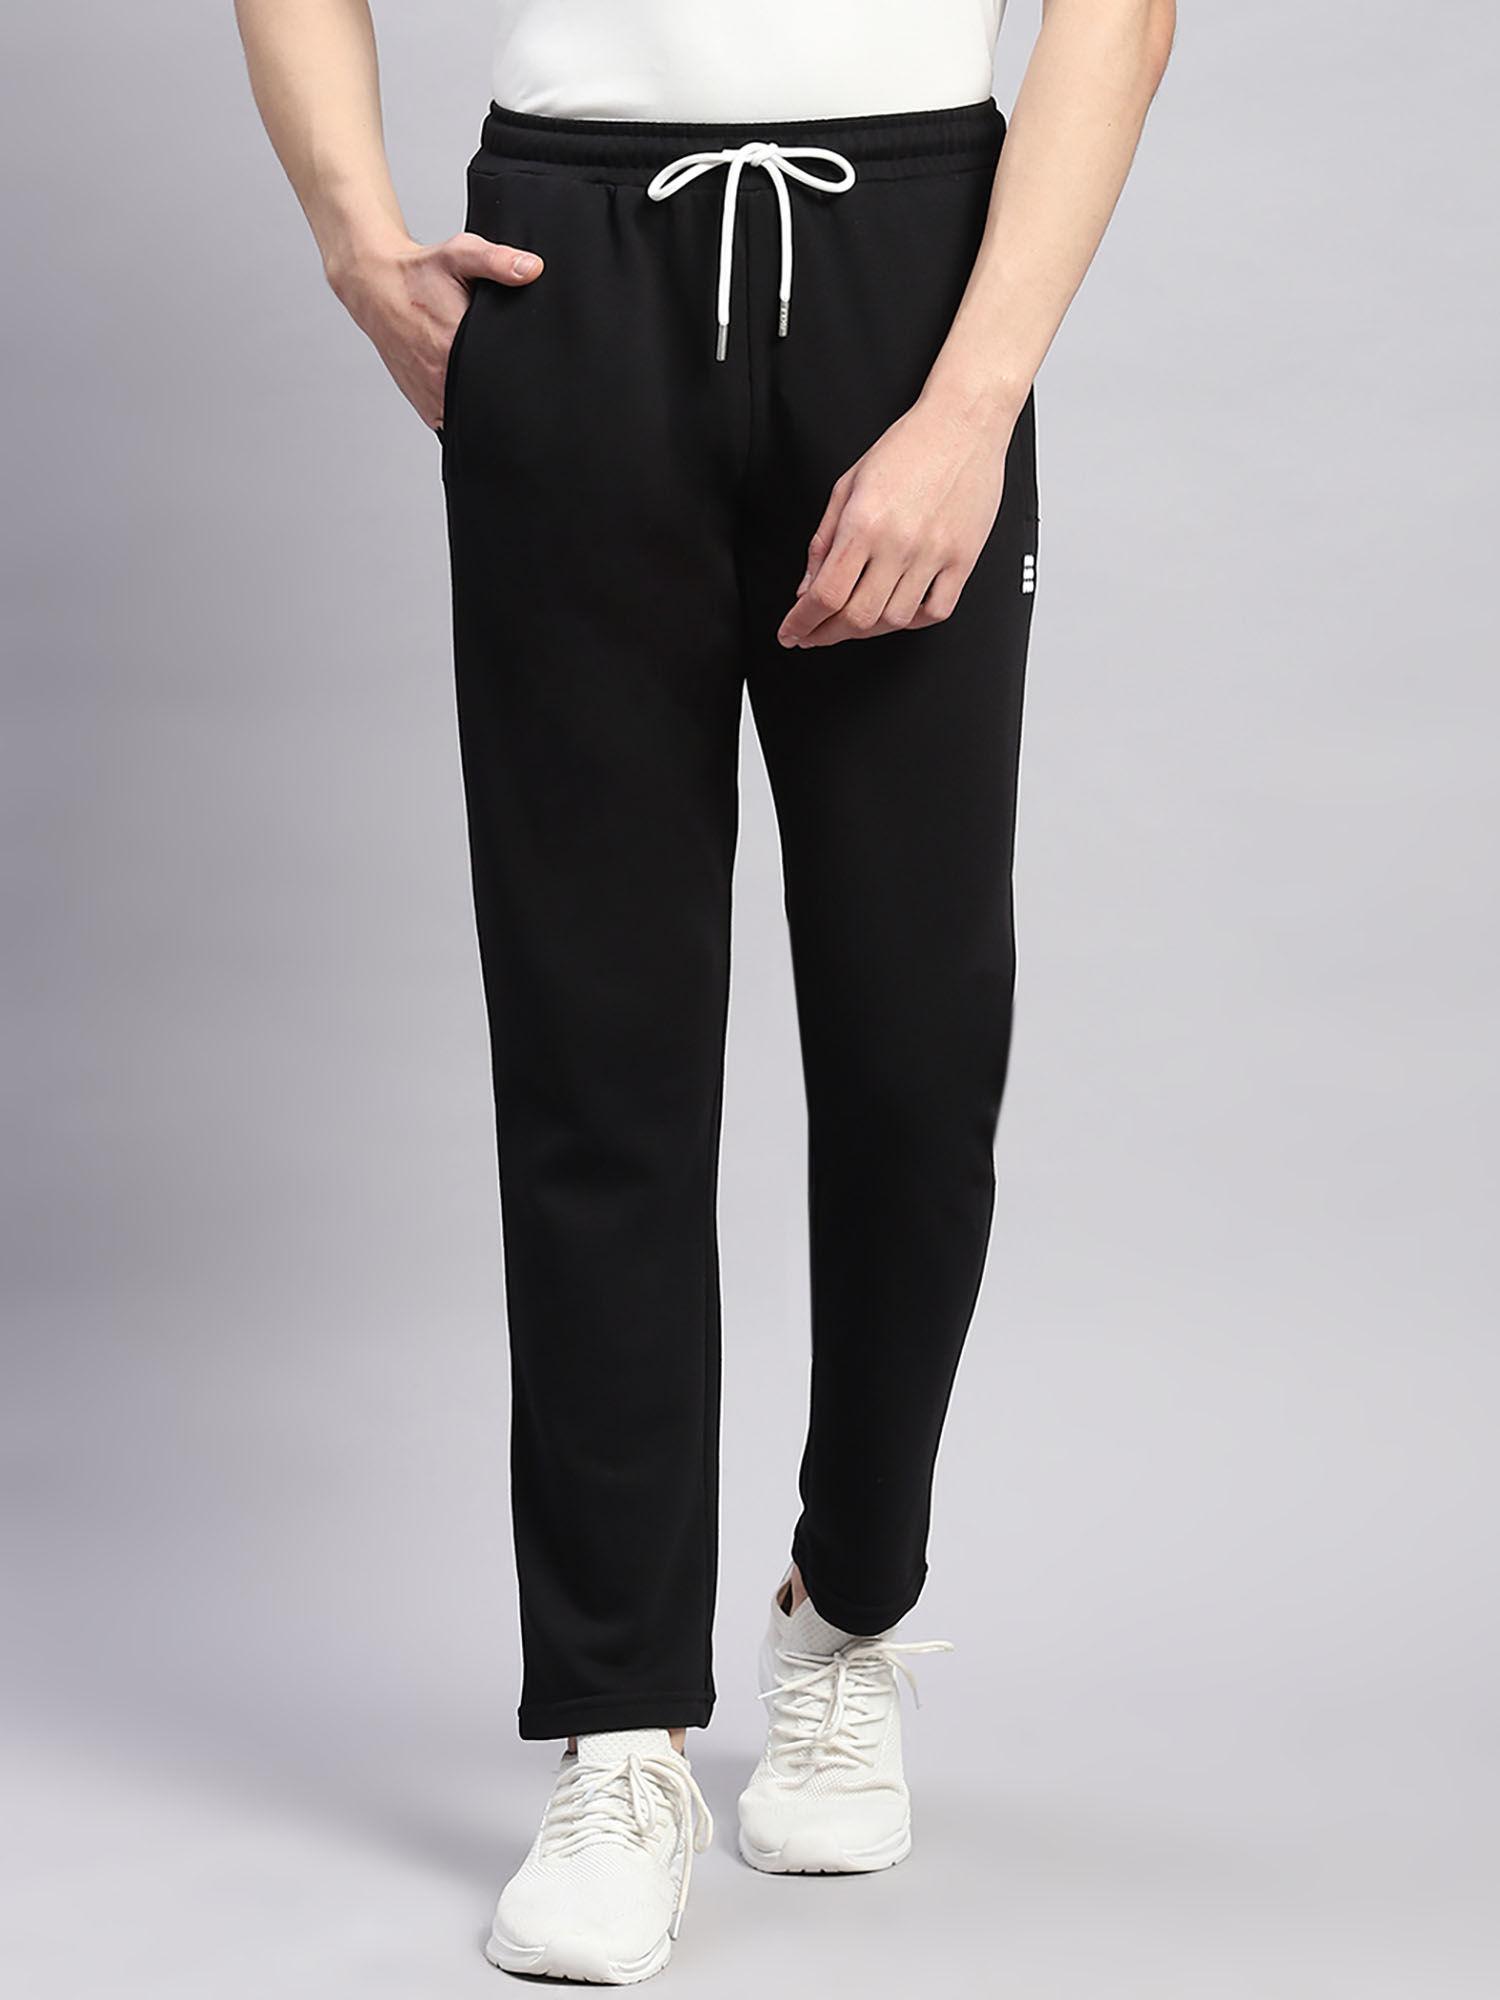 from-house-of-mens-black-solid-cotton-blend-trackpant